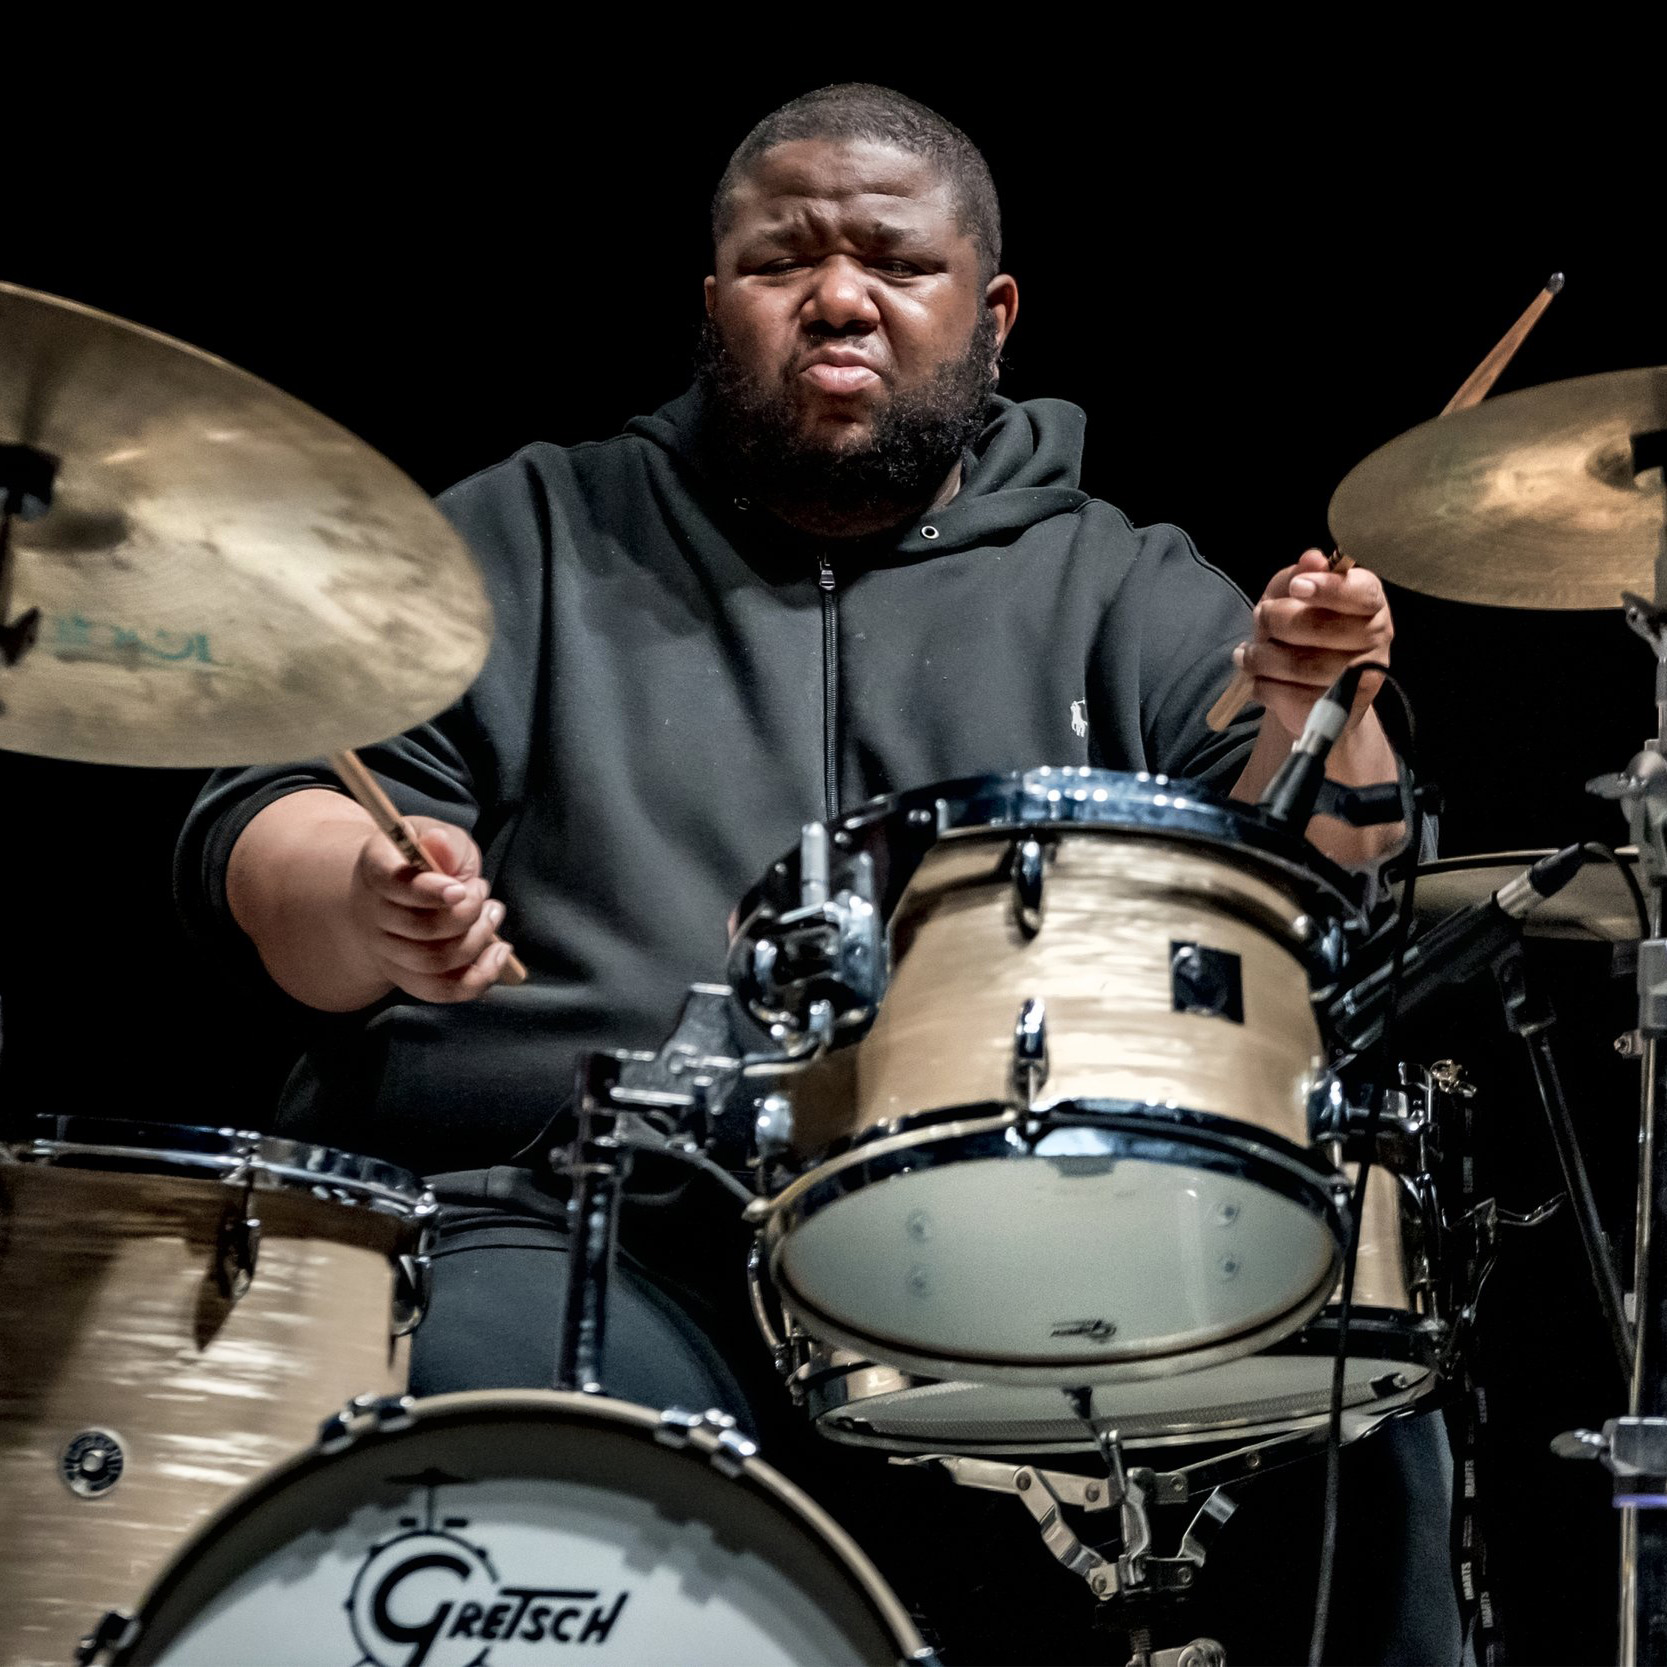 A black man sits at the drums and plays music intensely